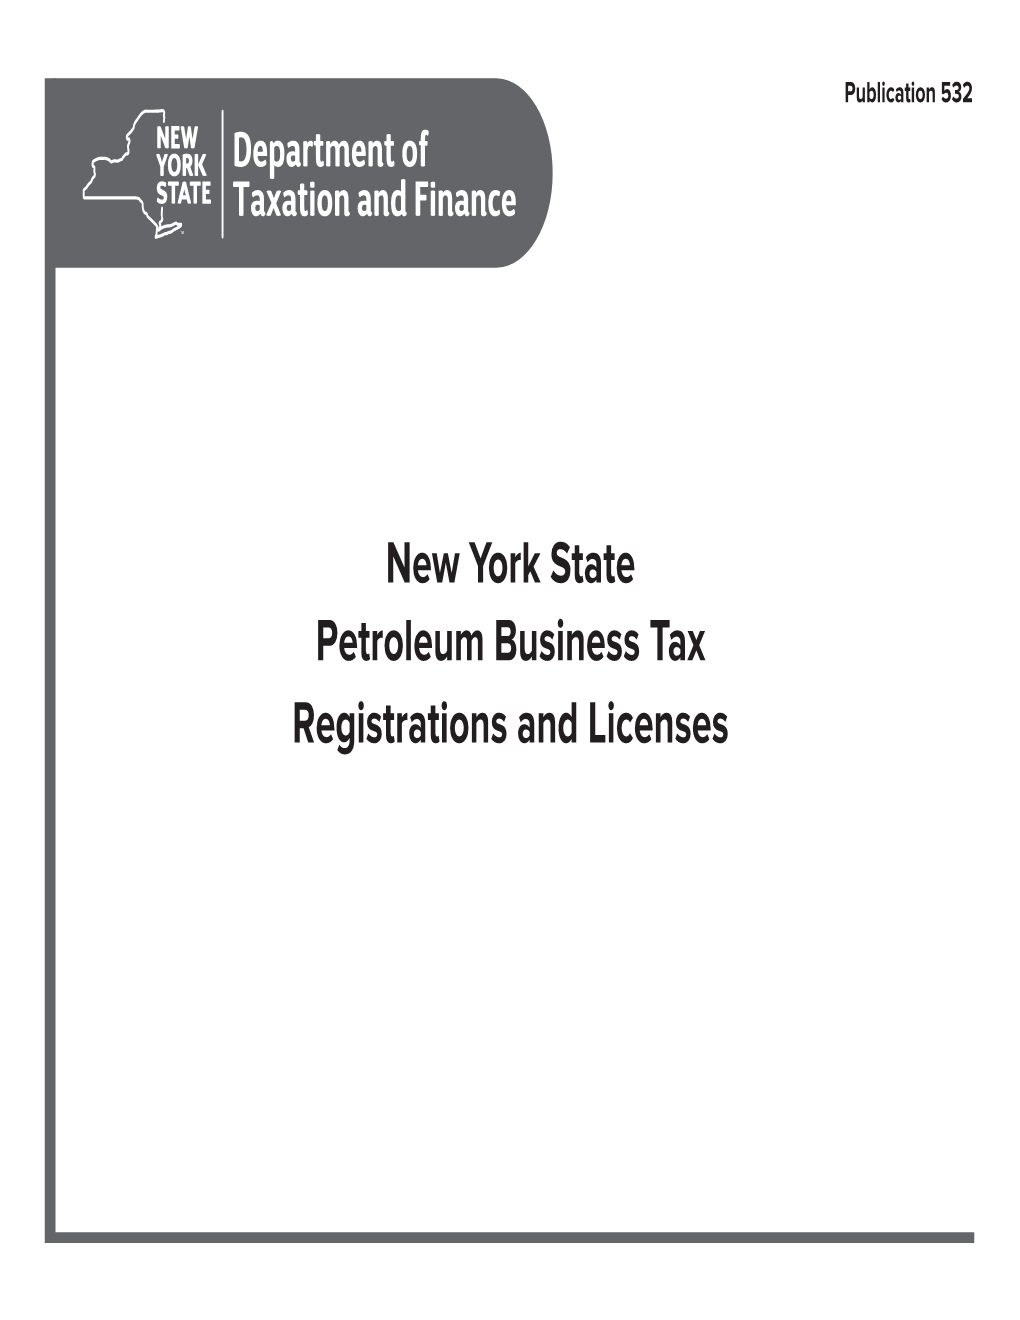 Publication 532:11/20:New York State Petroleum Business Tax